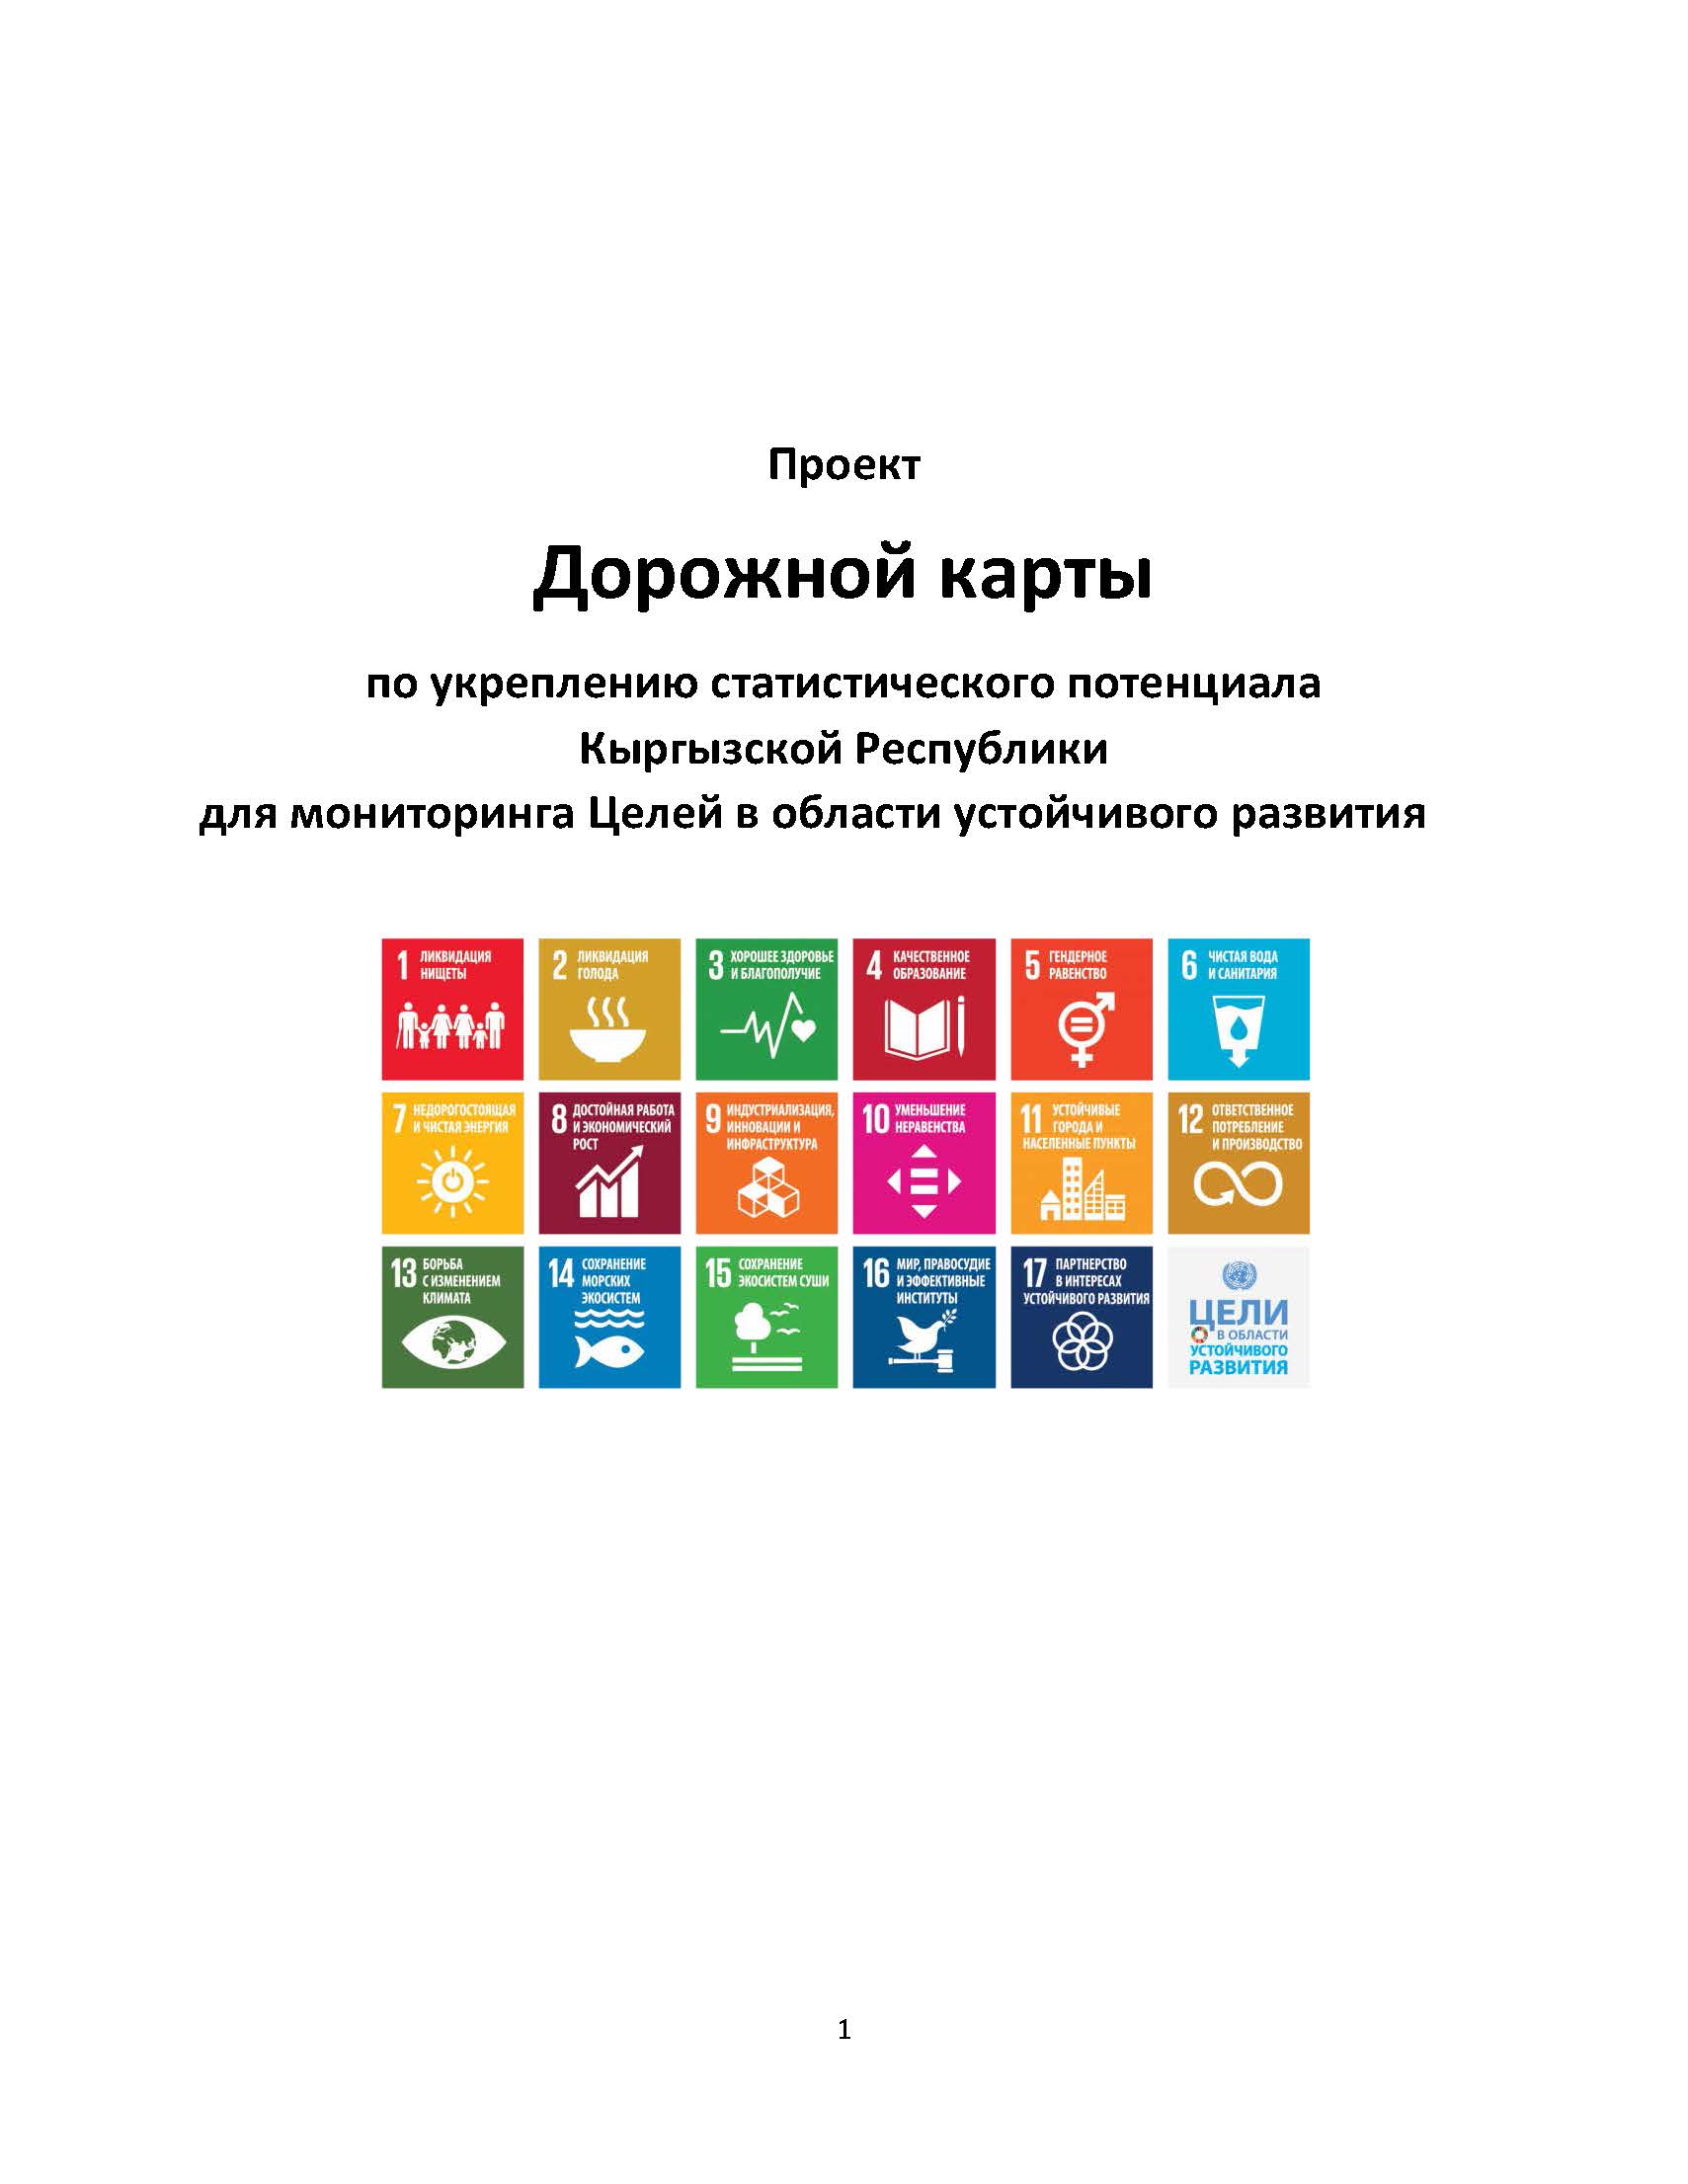 Draft Roadmap to strengthen the statistical capacity of the Kyrgyz Republic for SDG monitoring